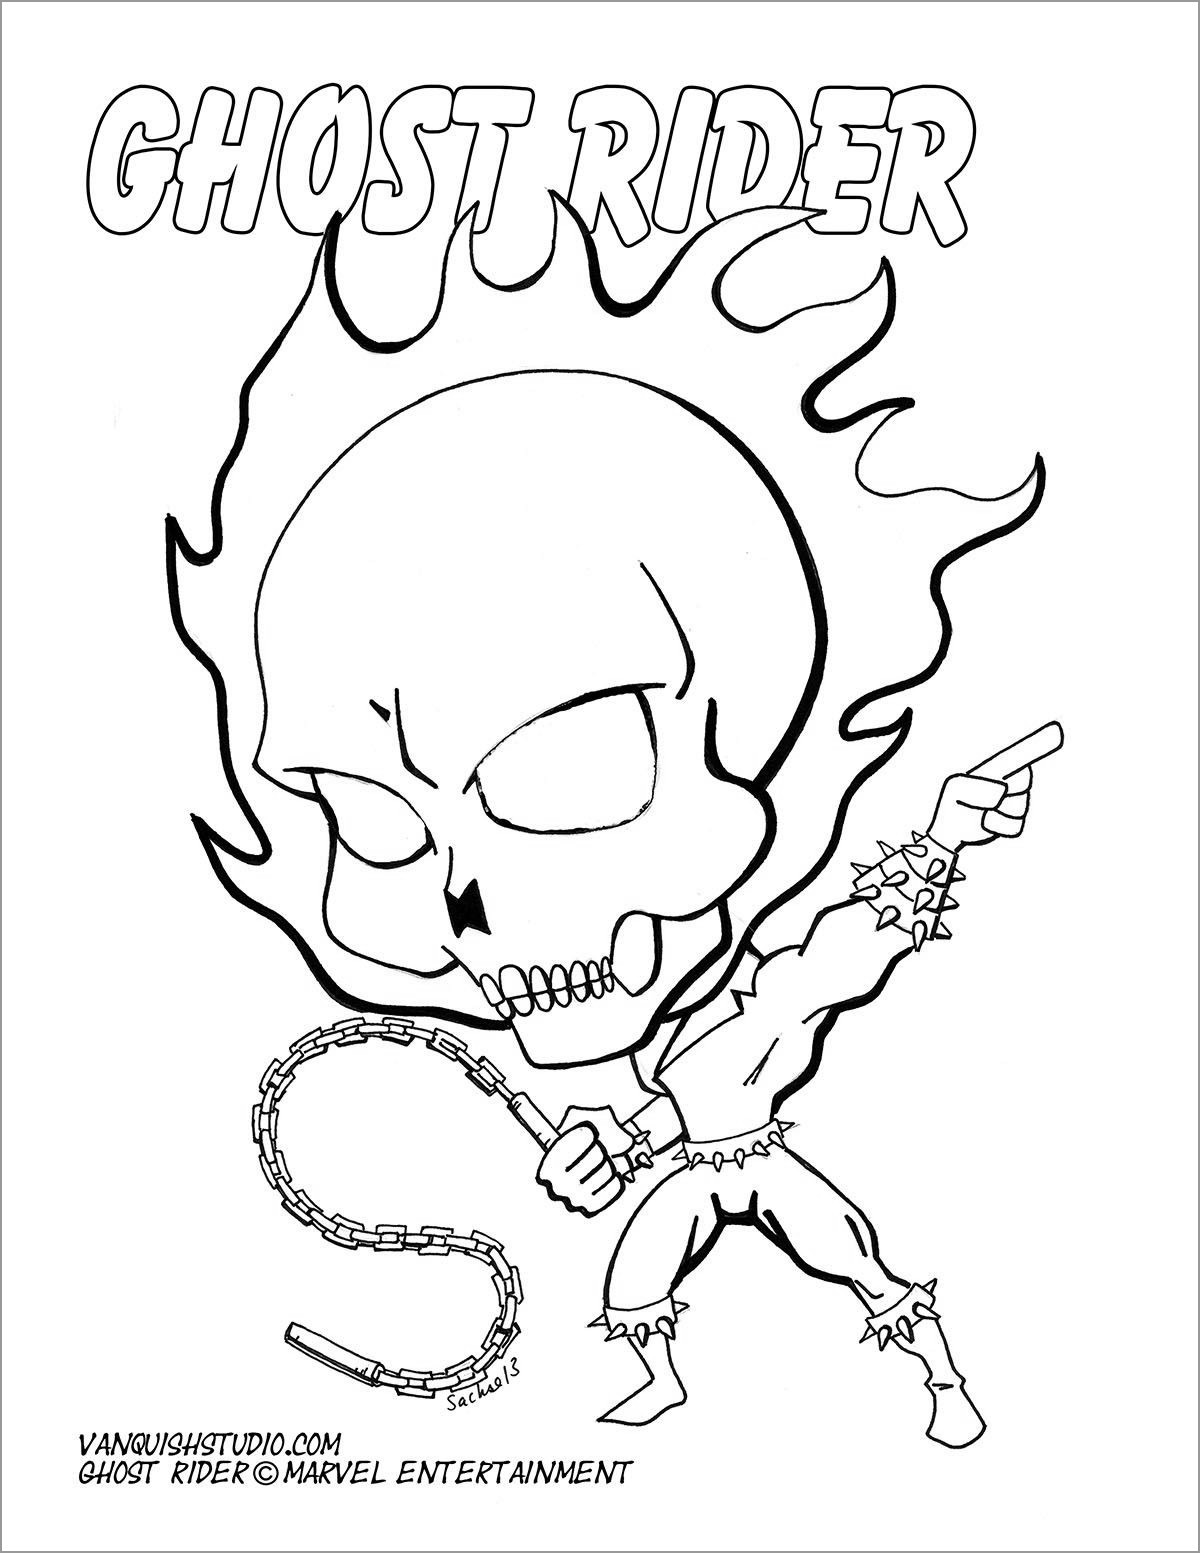 Chibi Ghostrider Coloring Page